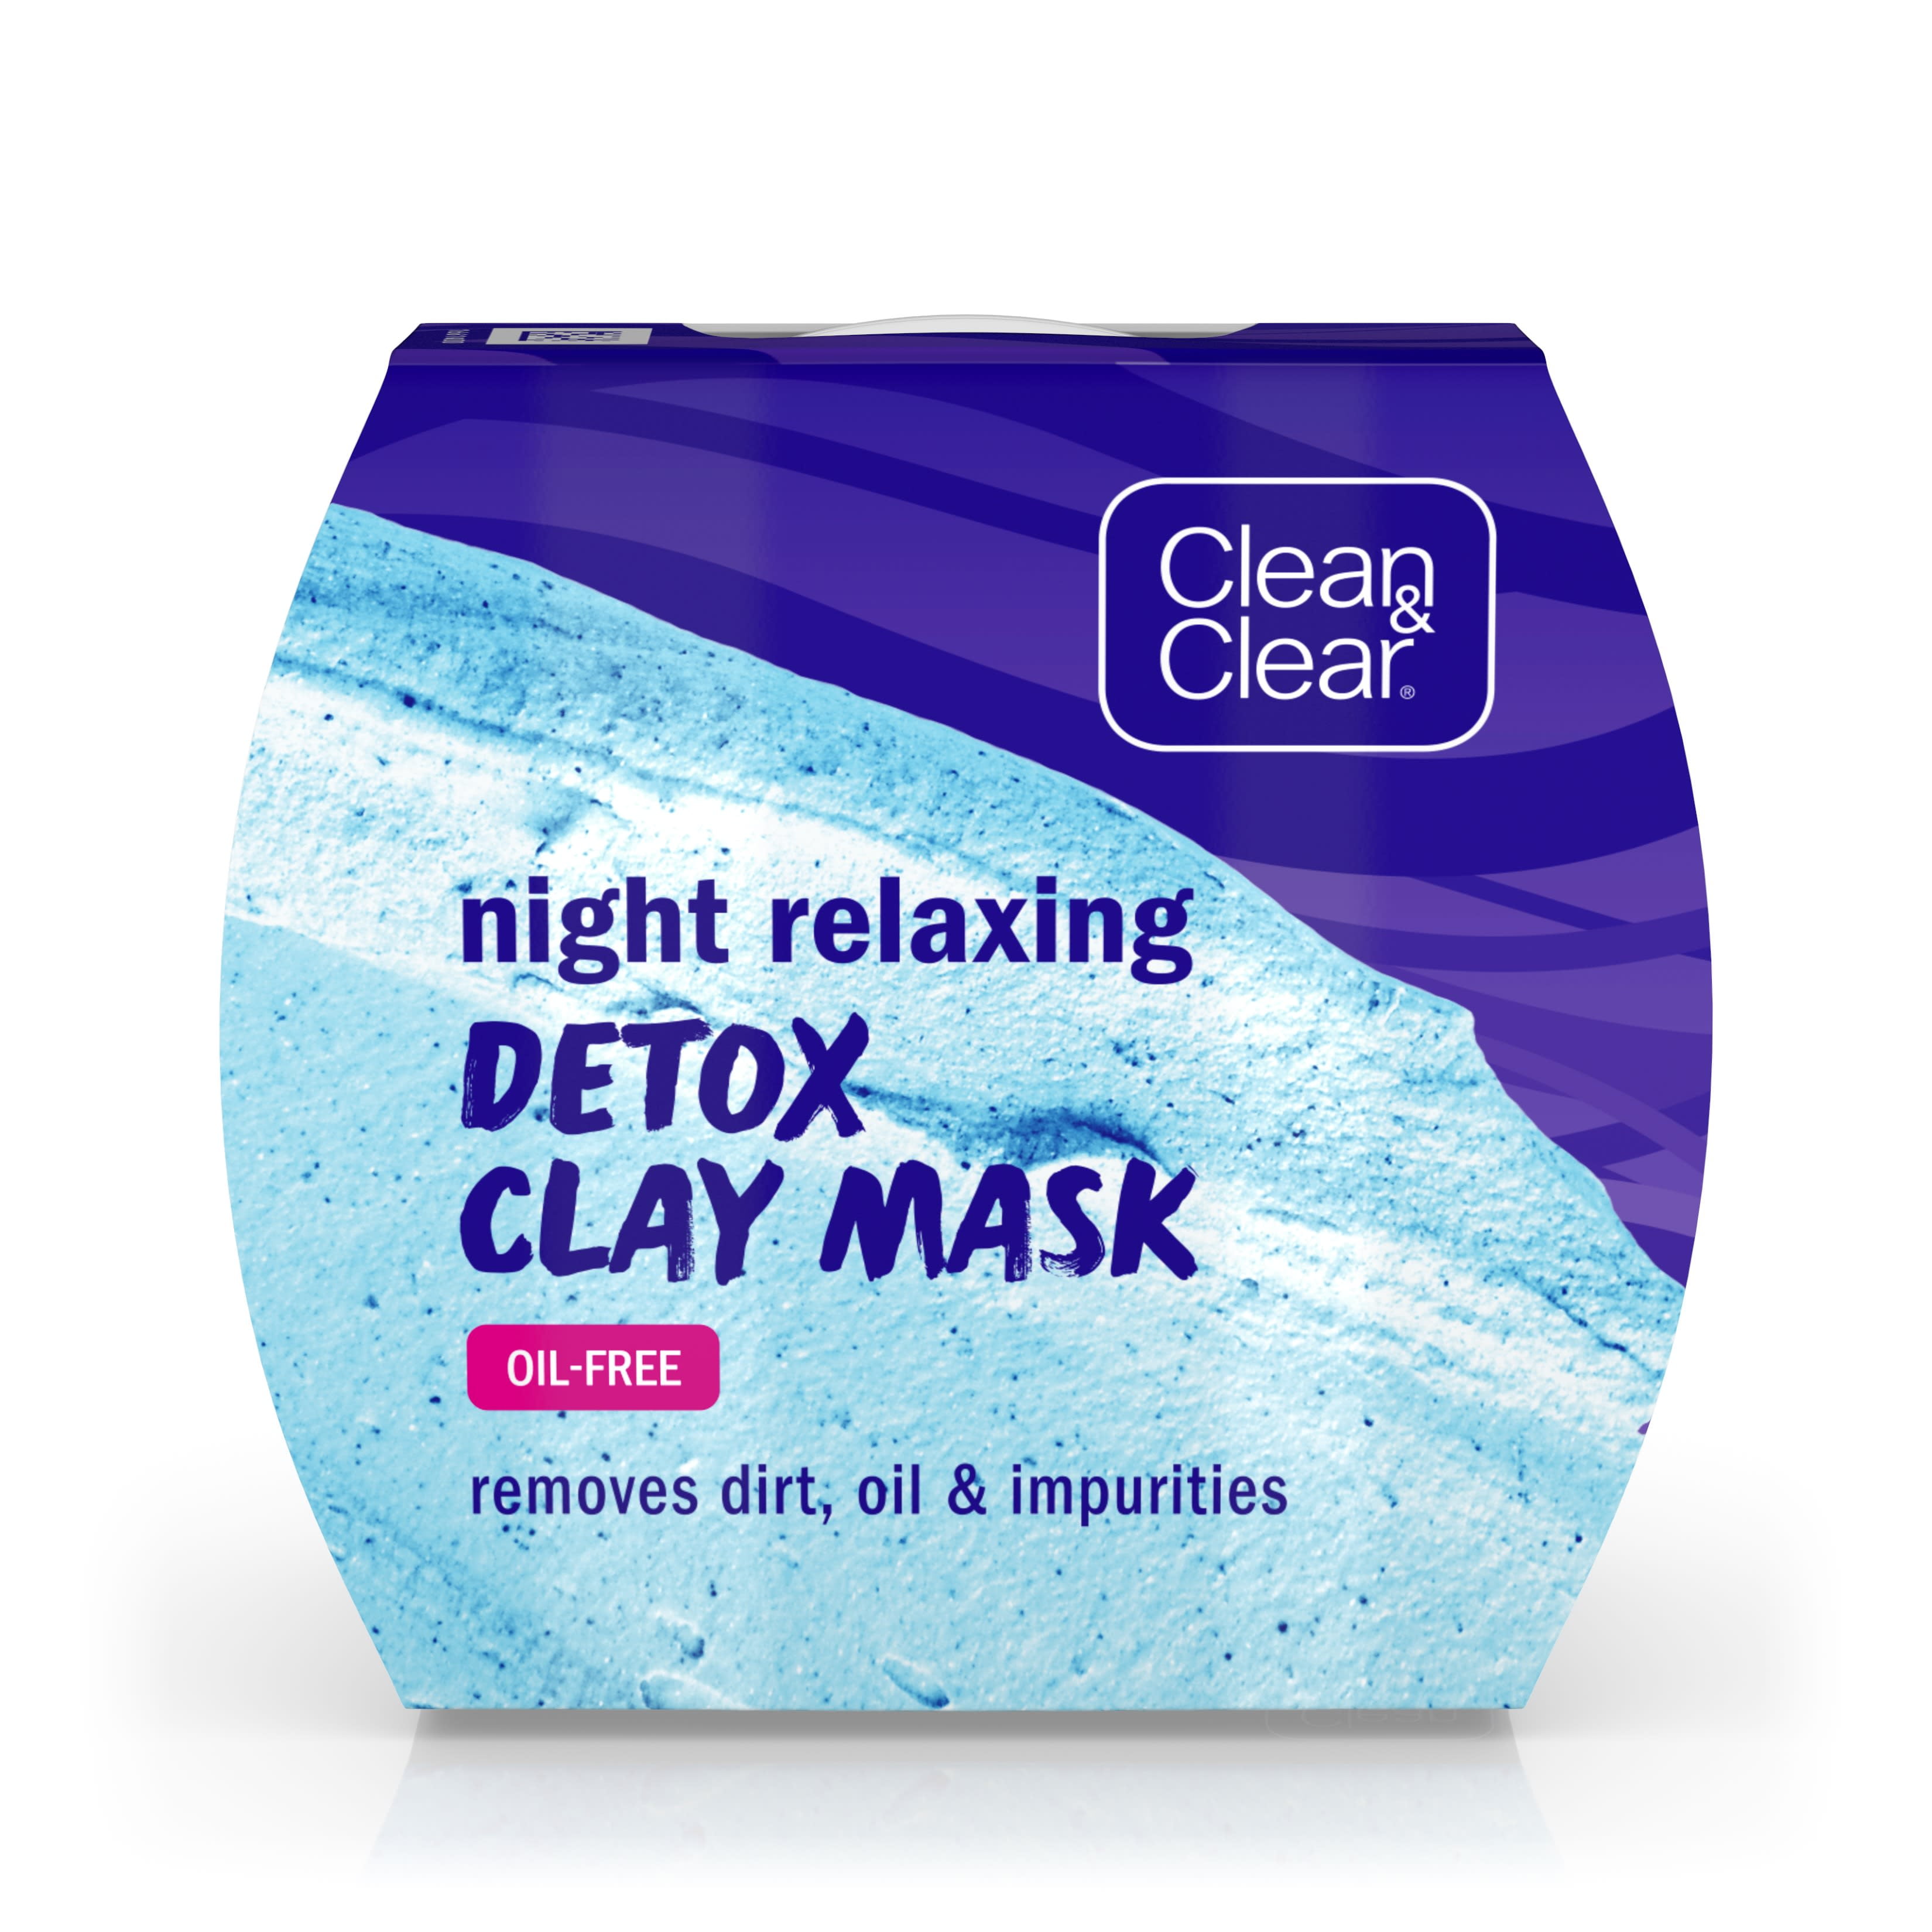 Detox Clay Mask. Clear. The Ultimate Relaxation and Detoxification.